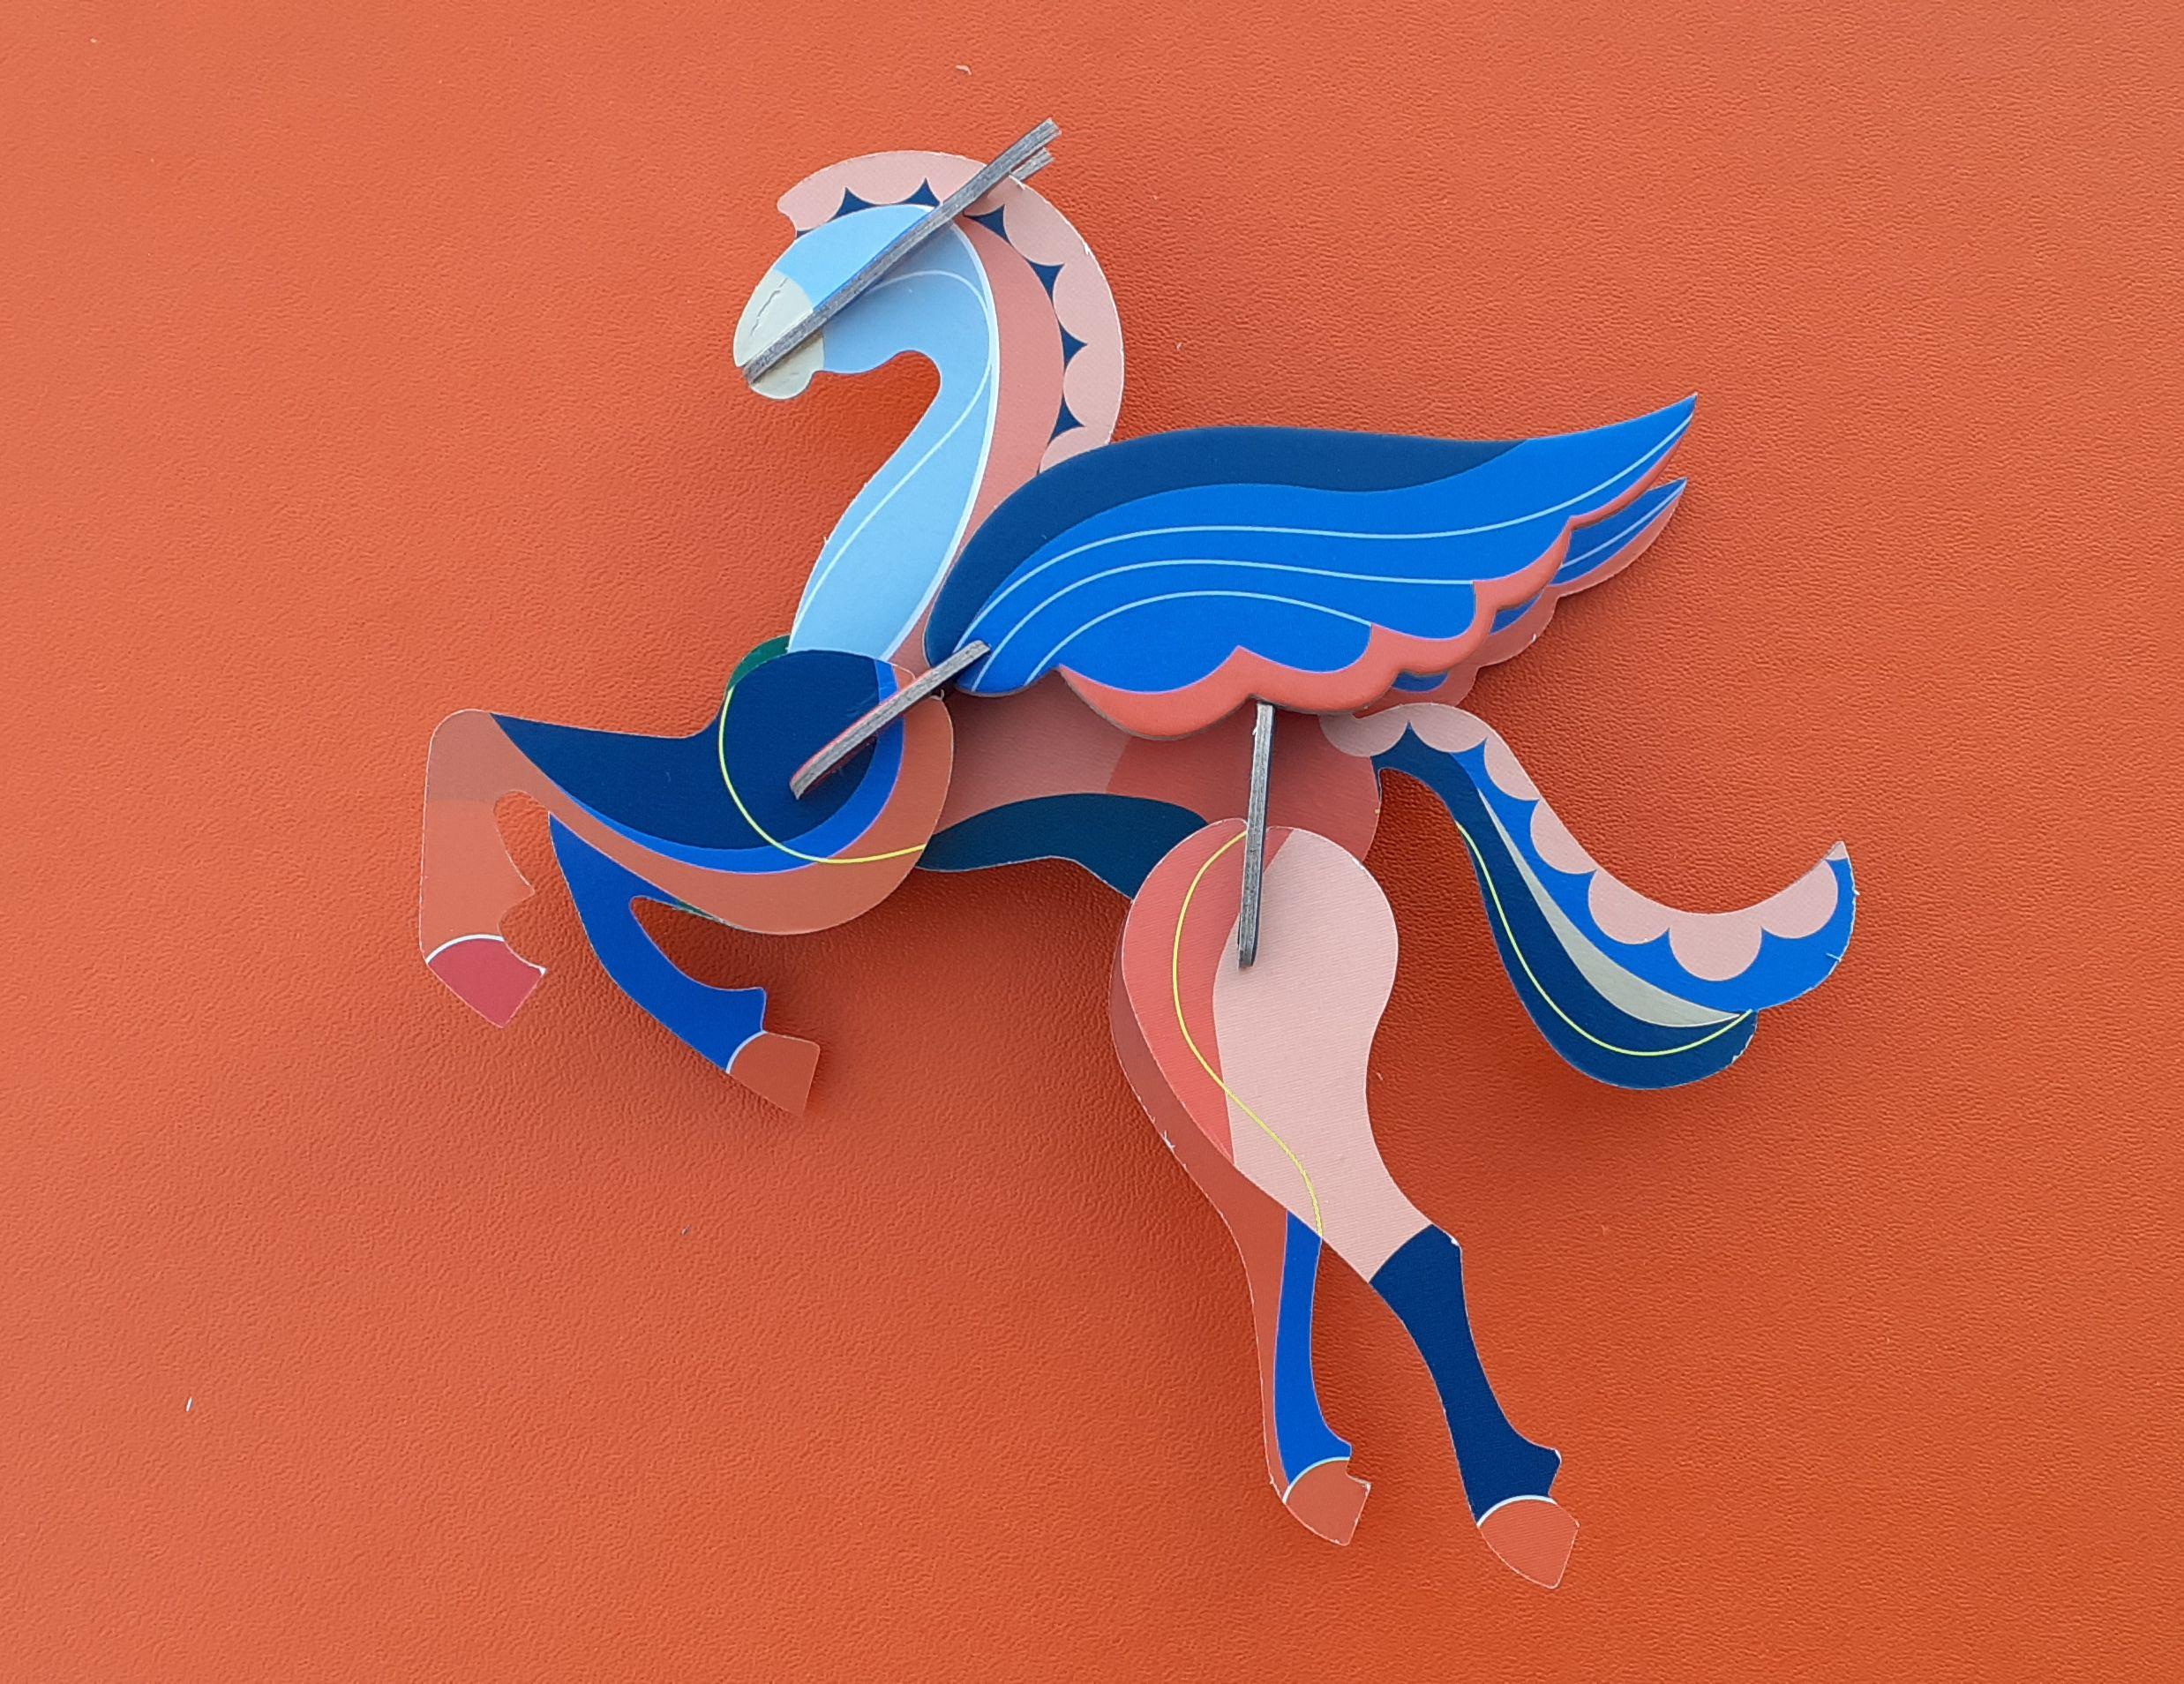 Hermès Pegasus Le Pégase Cheval Ailé Winged Horse in Cardboard to Hang For Sale 8